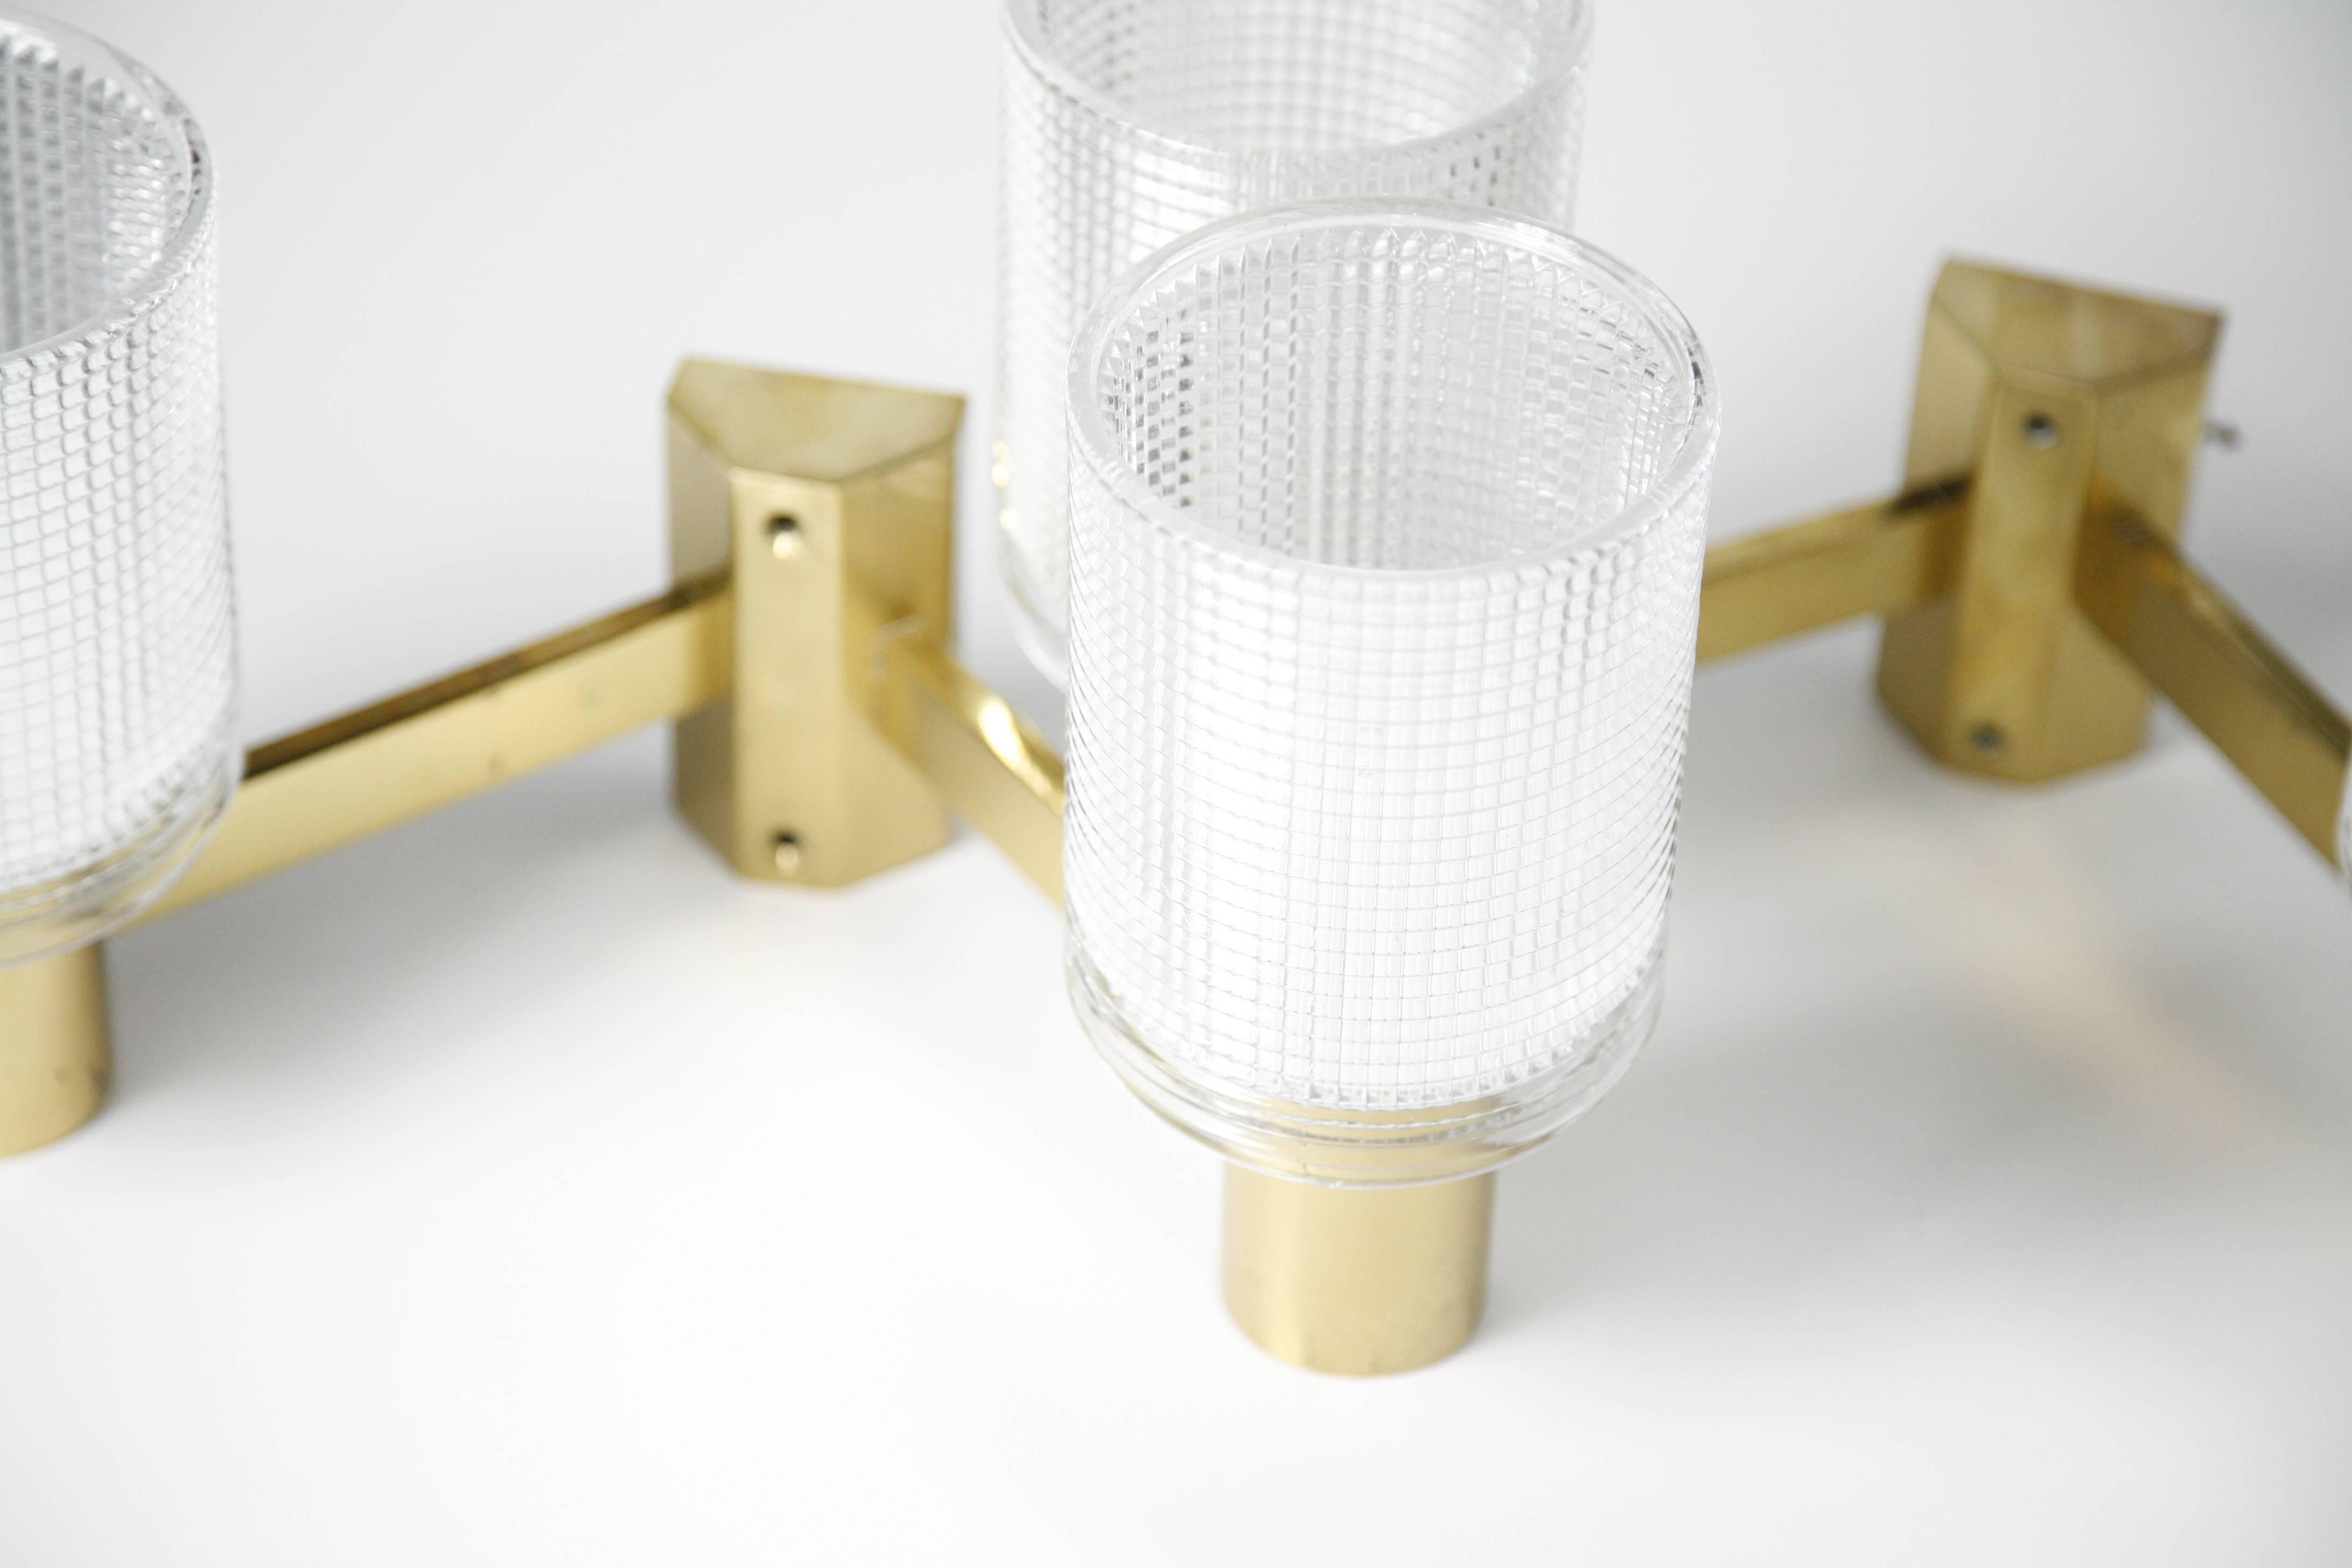 Pair of Swedish wall lights by Hans agne jakobson, Sweden 1970.
Two arm polished brass holding a thick textured round crystal glass shade, one Edison socket in each.
Very modern classy design Hans agne designed and produced all he's lighting, two